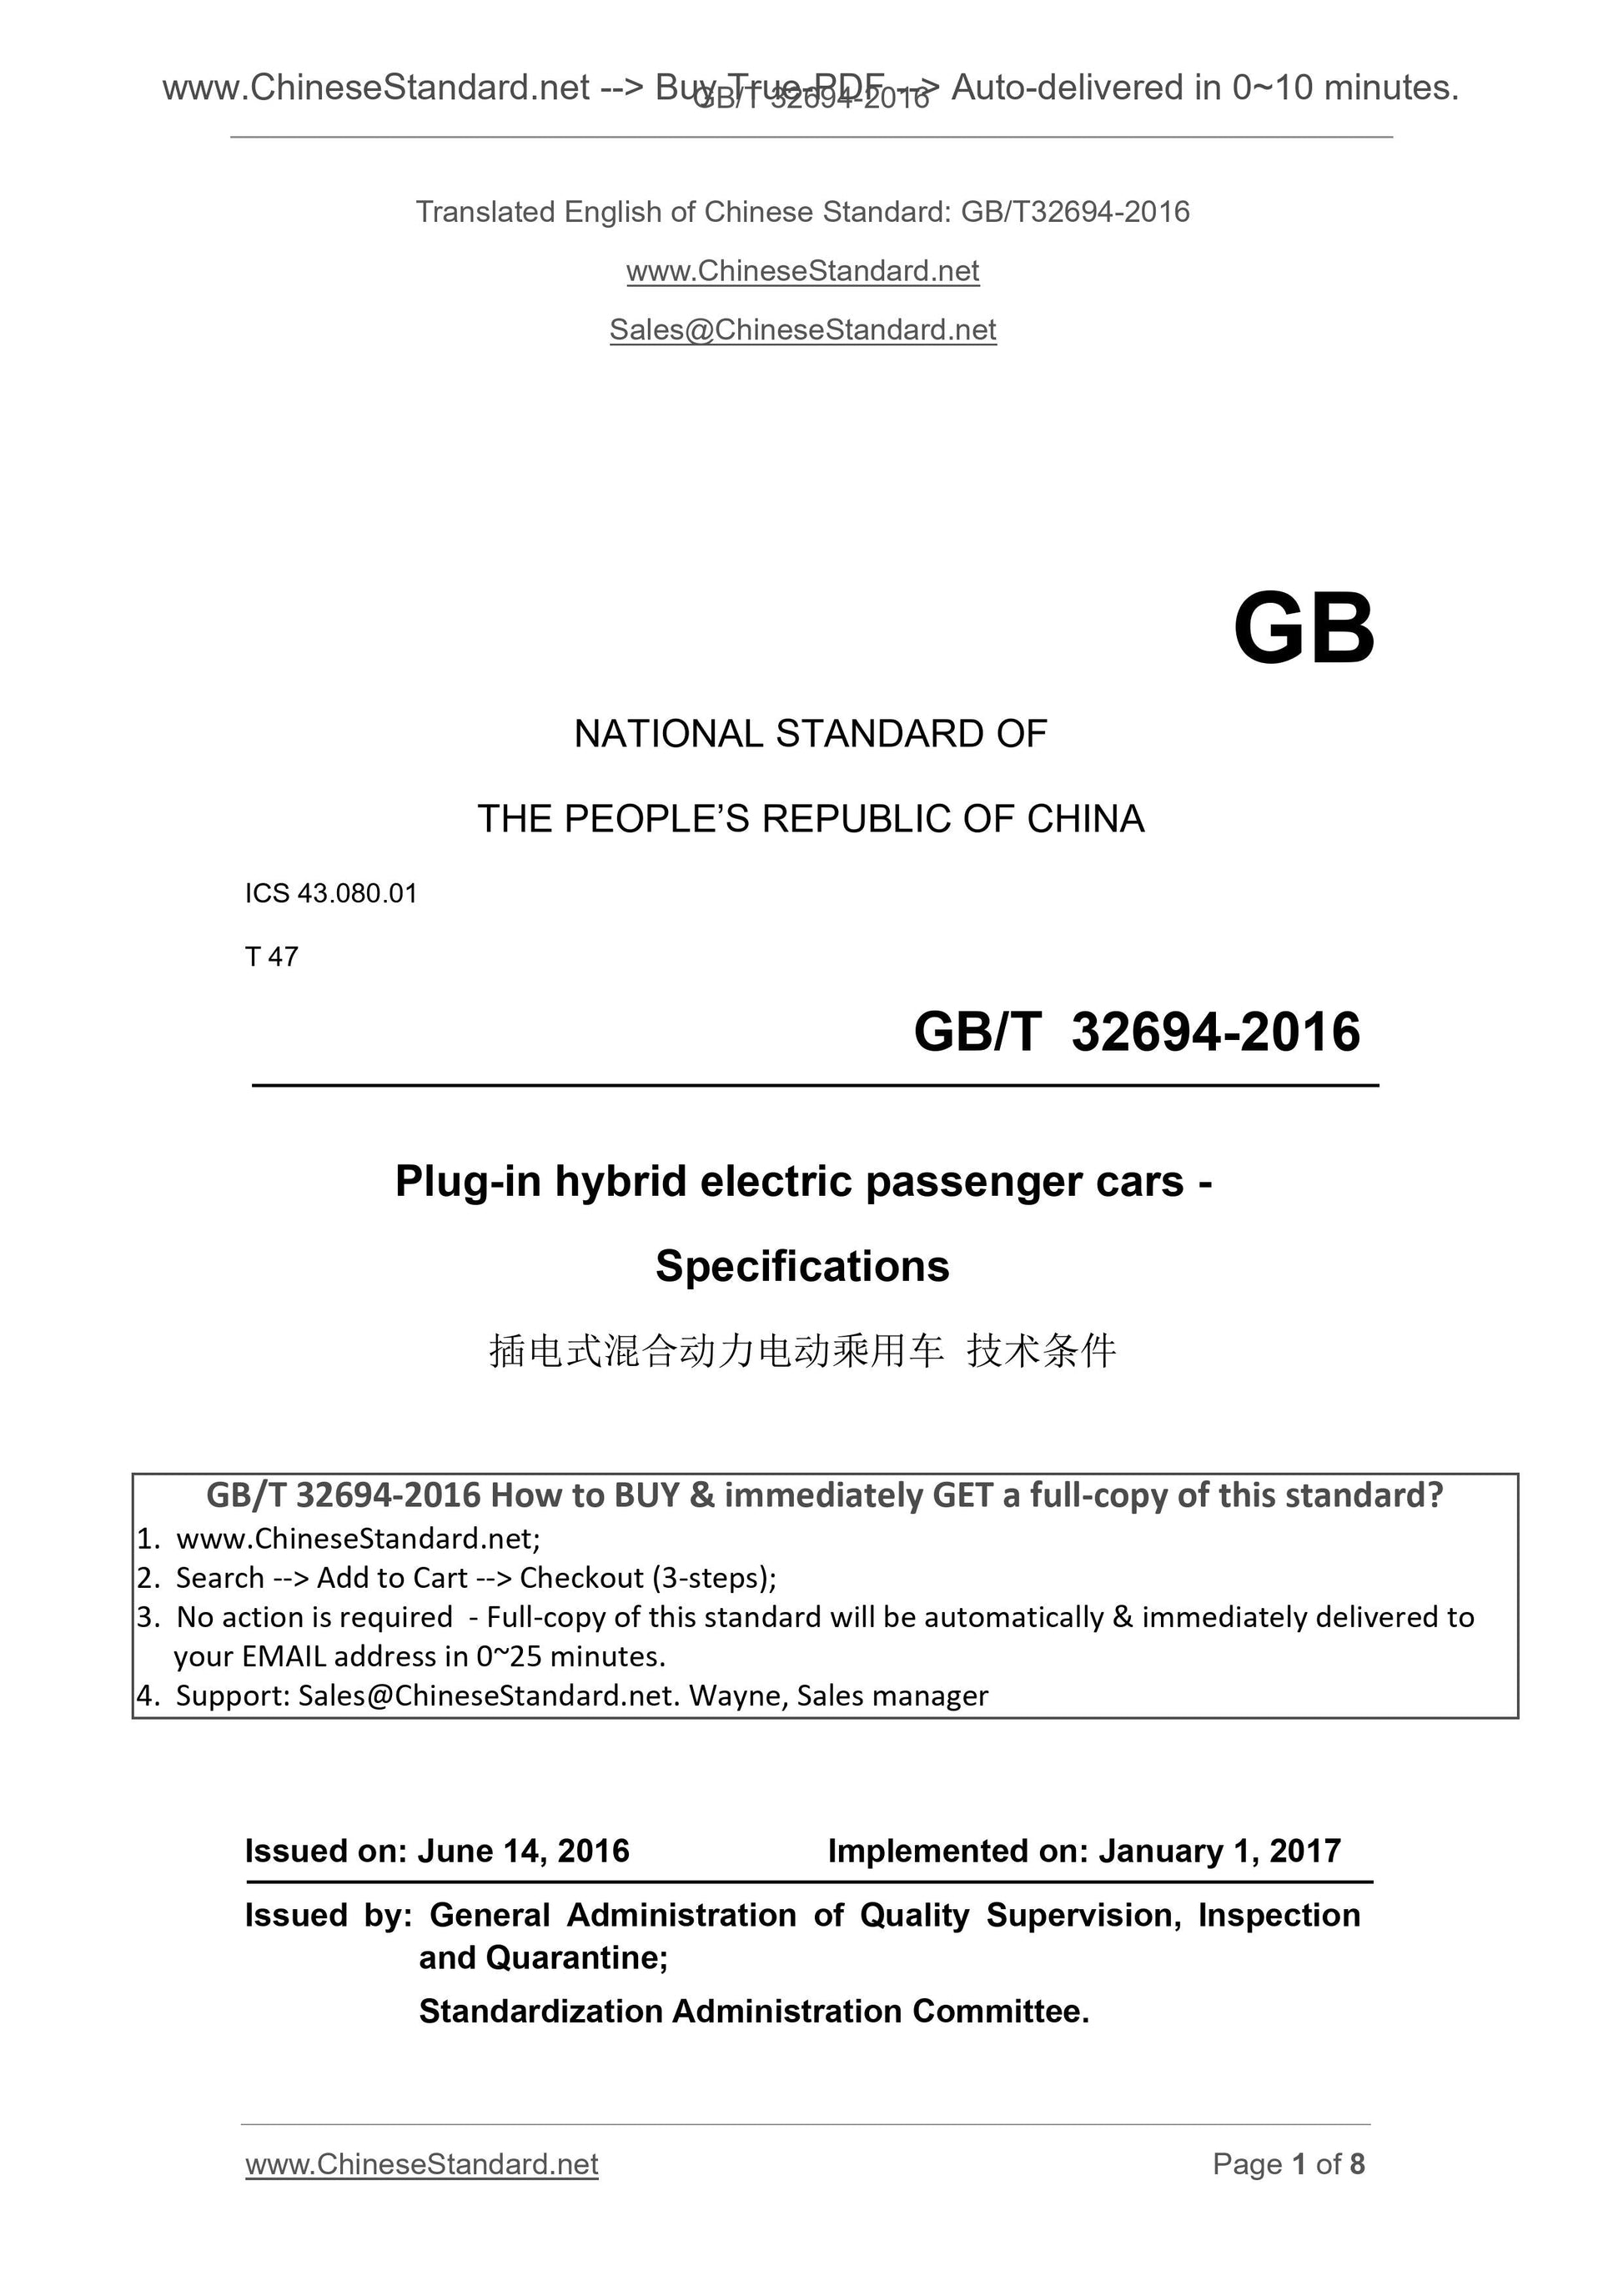 GB/T 32694-2016 Page 1